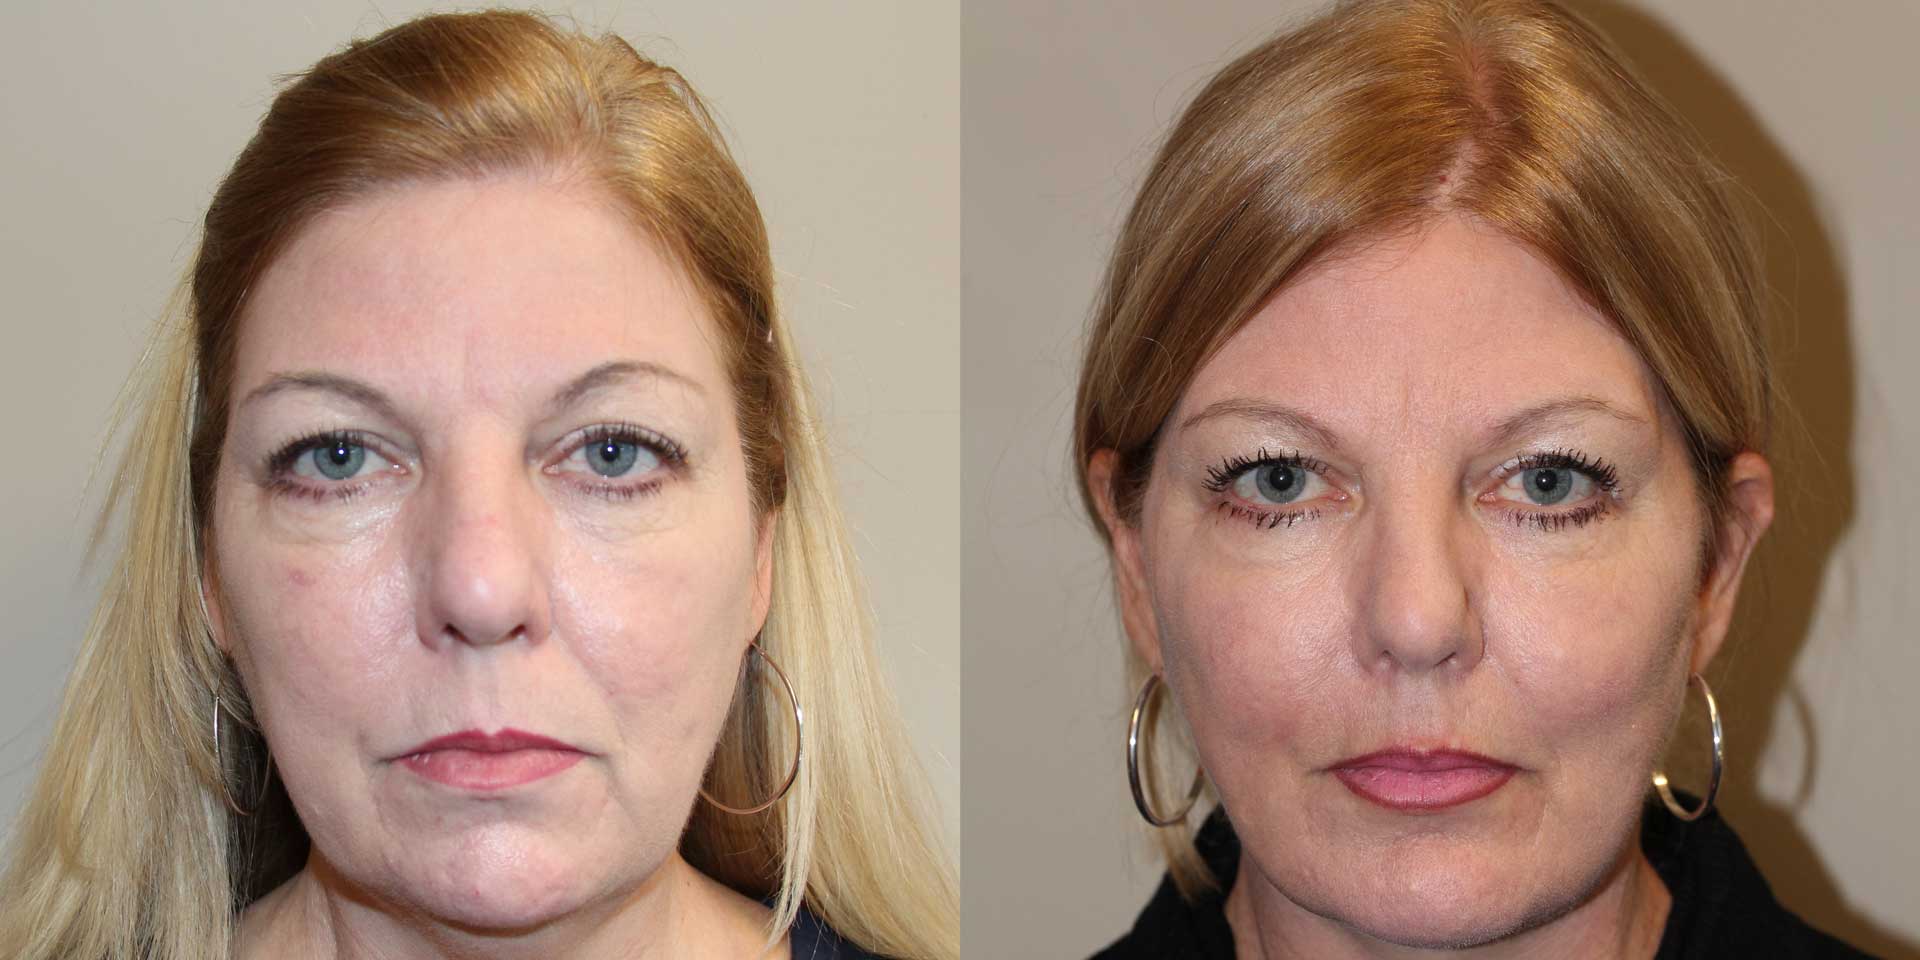 facelift 14425 before after front 05 face lift surgery vancouver, burnaby, coquitlam, richmond, delta, bc